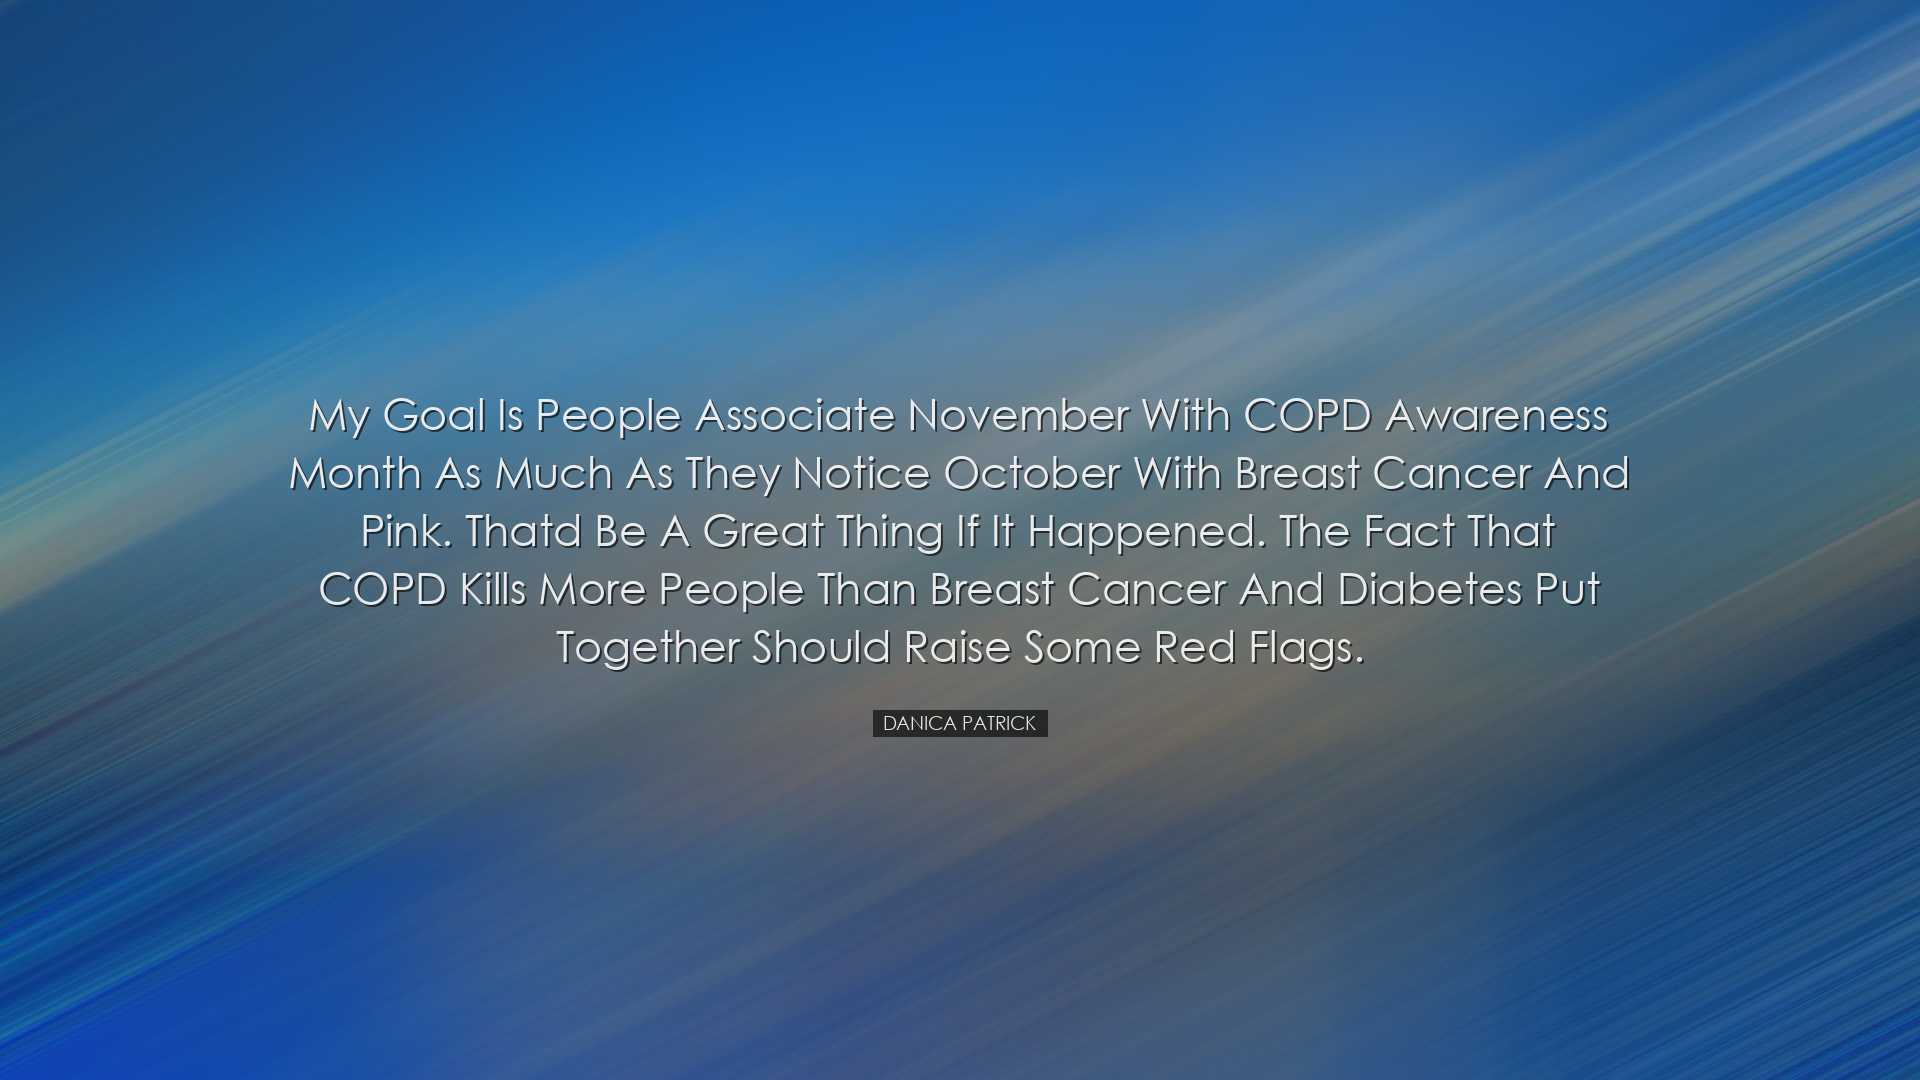 My goal is people associate November with COPD awareness month as